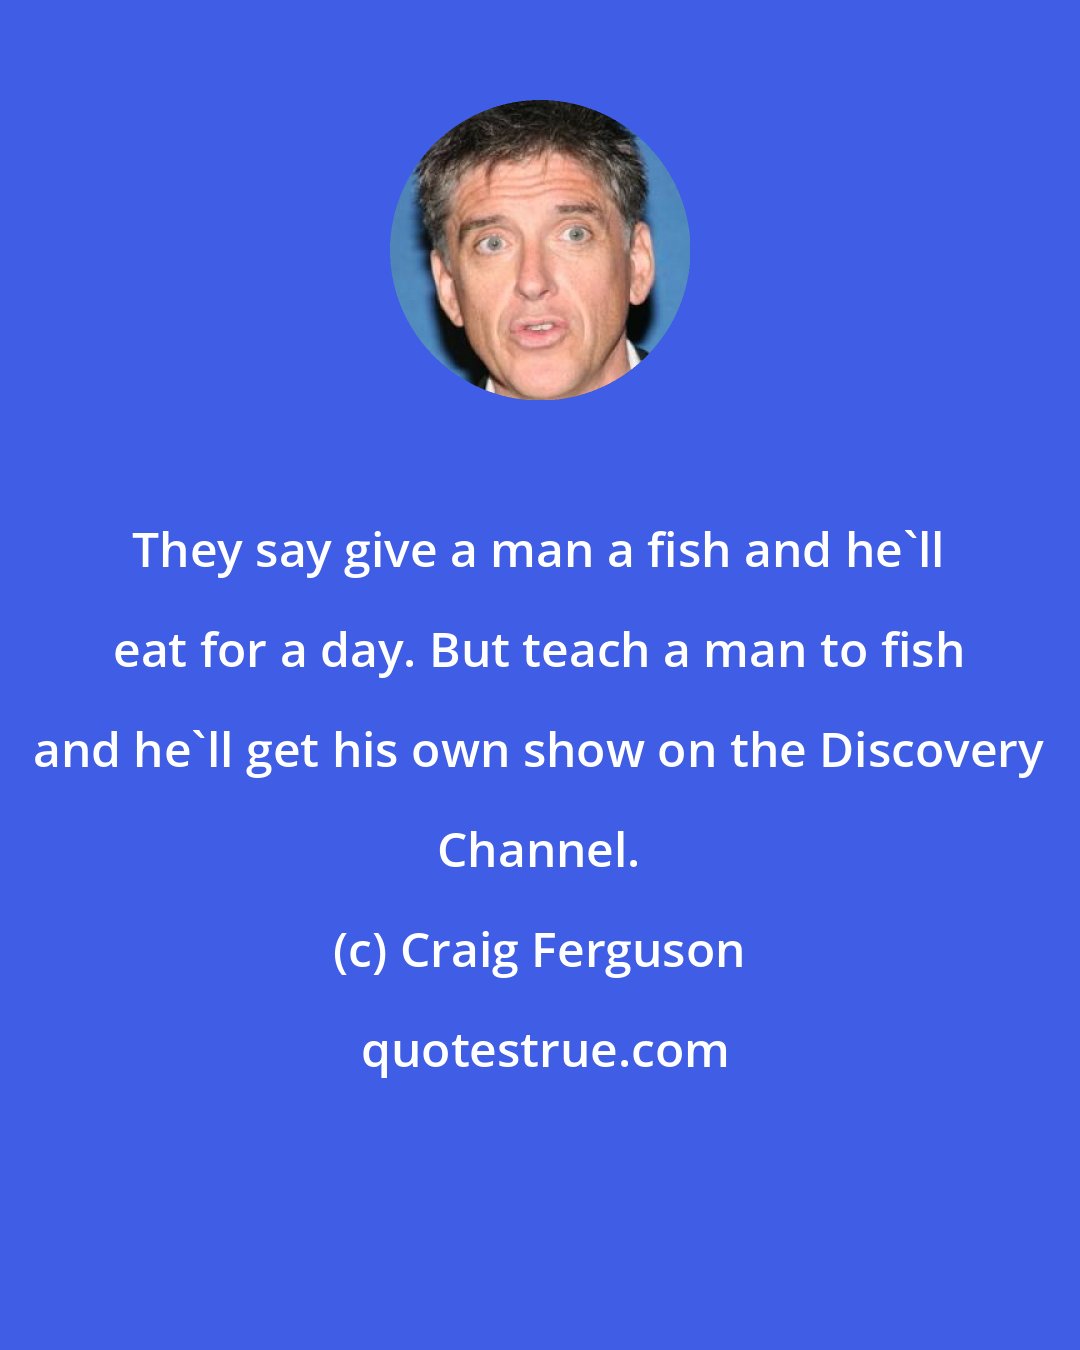 Craig Ferguson: They say give a man a fish and he'll eat for a day. But teach a man to fish and he'll get his own show on the Discovery Channel.